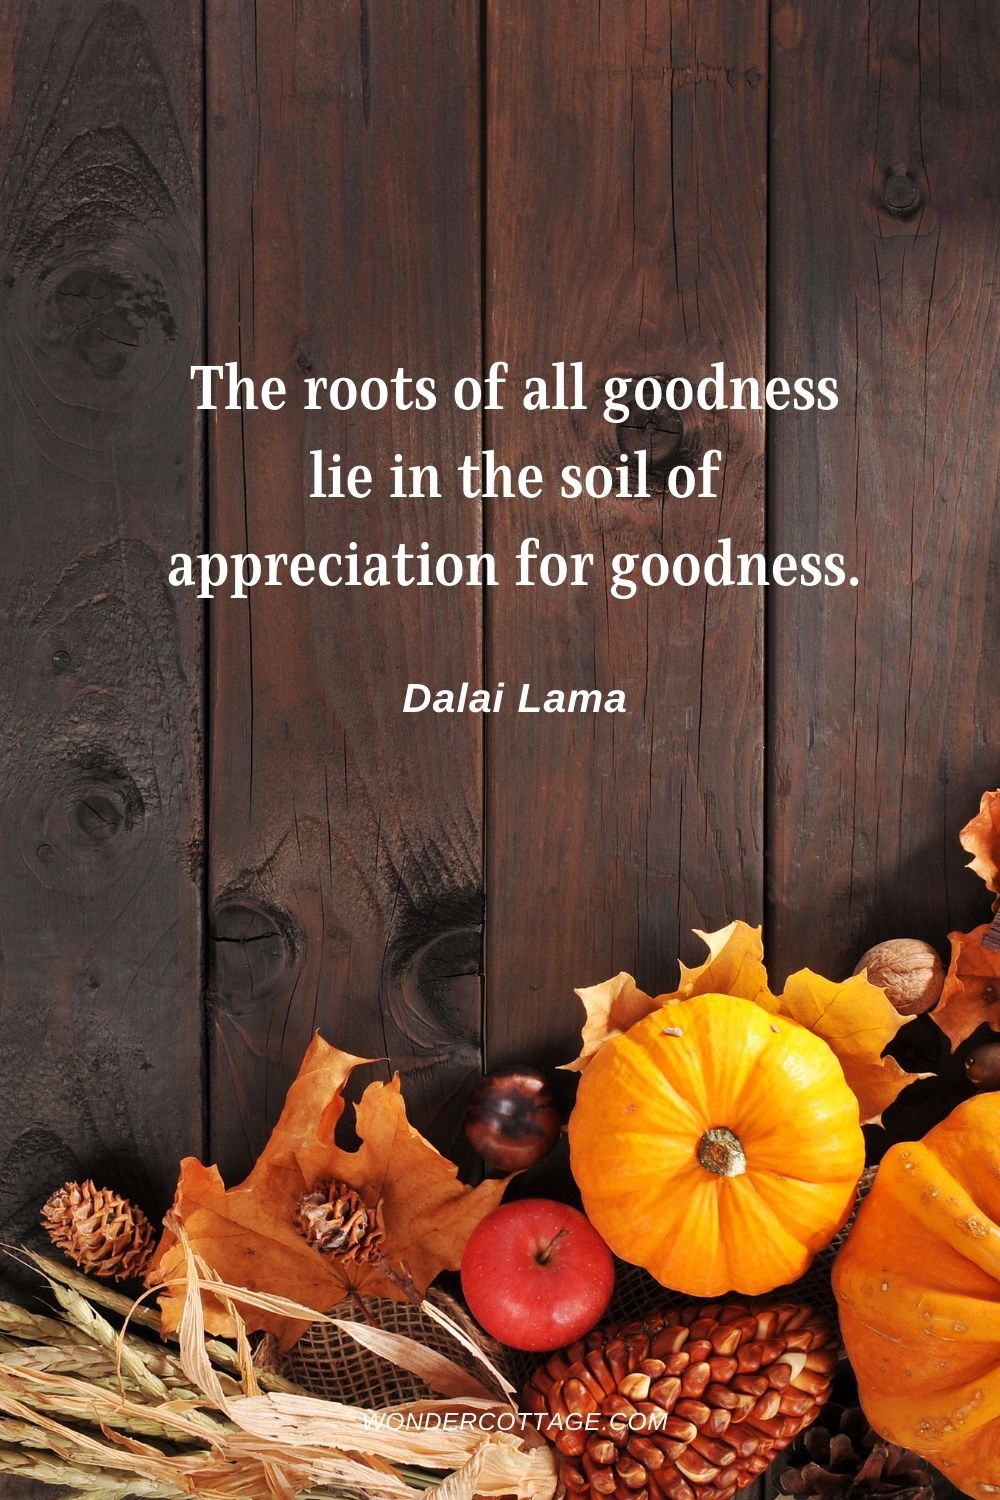 The roots of all goodness lie in the soil of appreciation for goodness. Dalai Lama